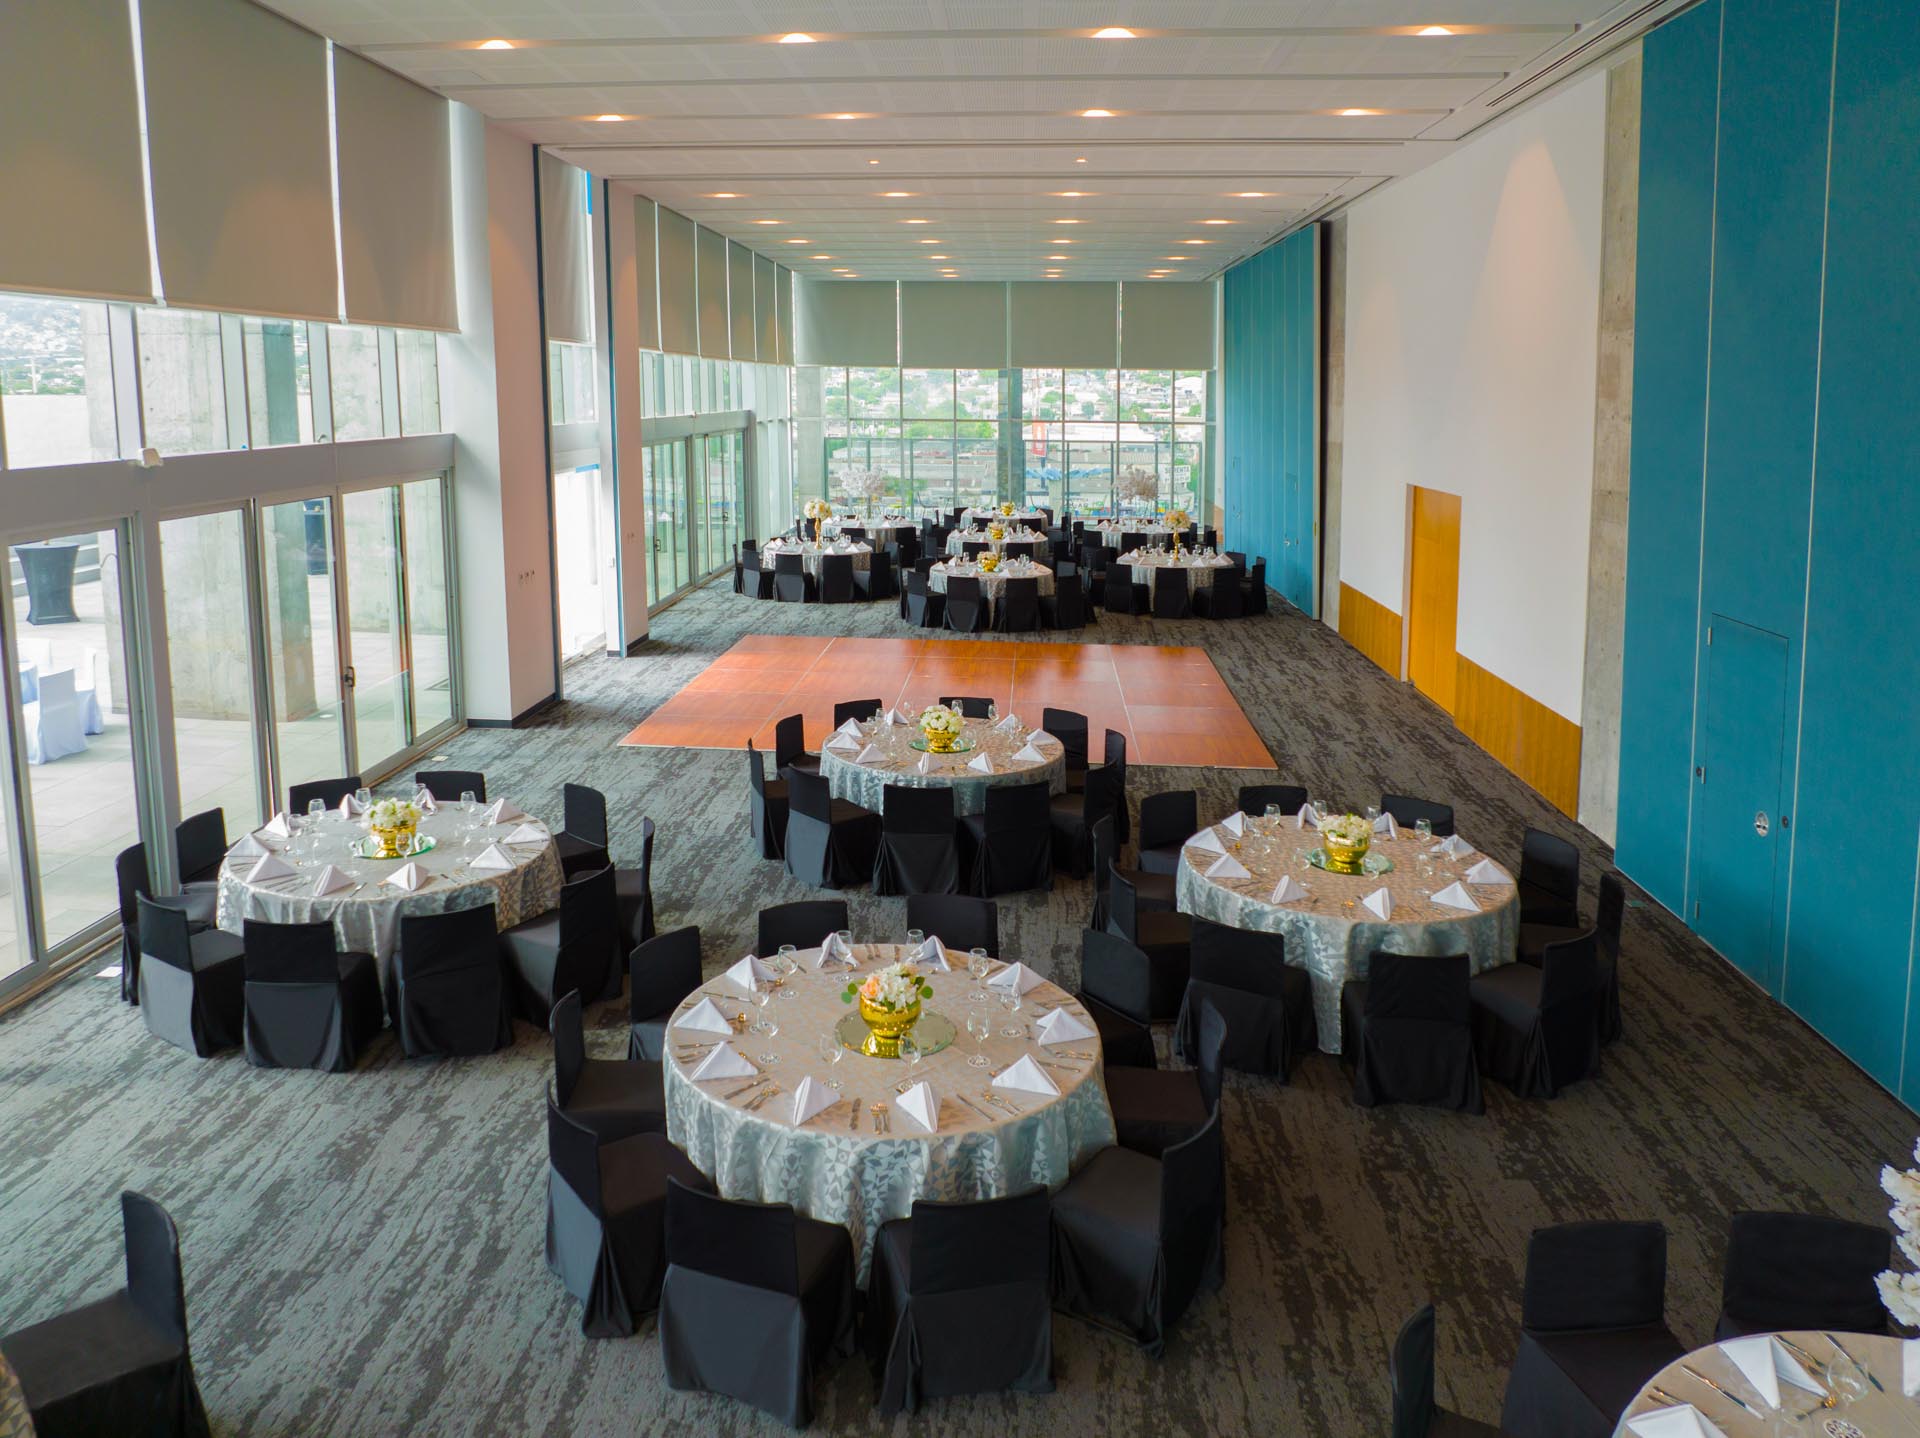 Event Space with round tables